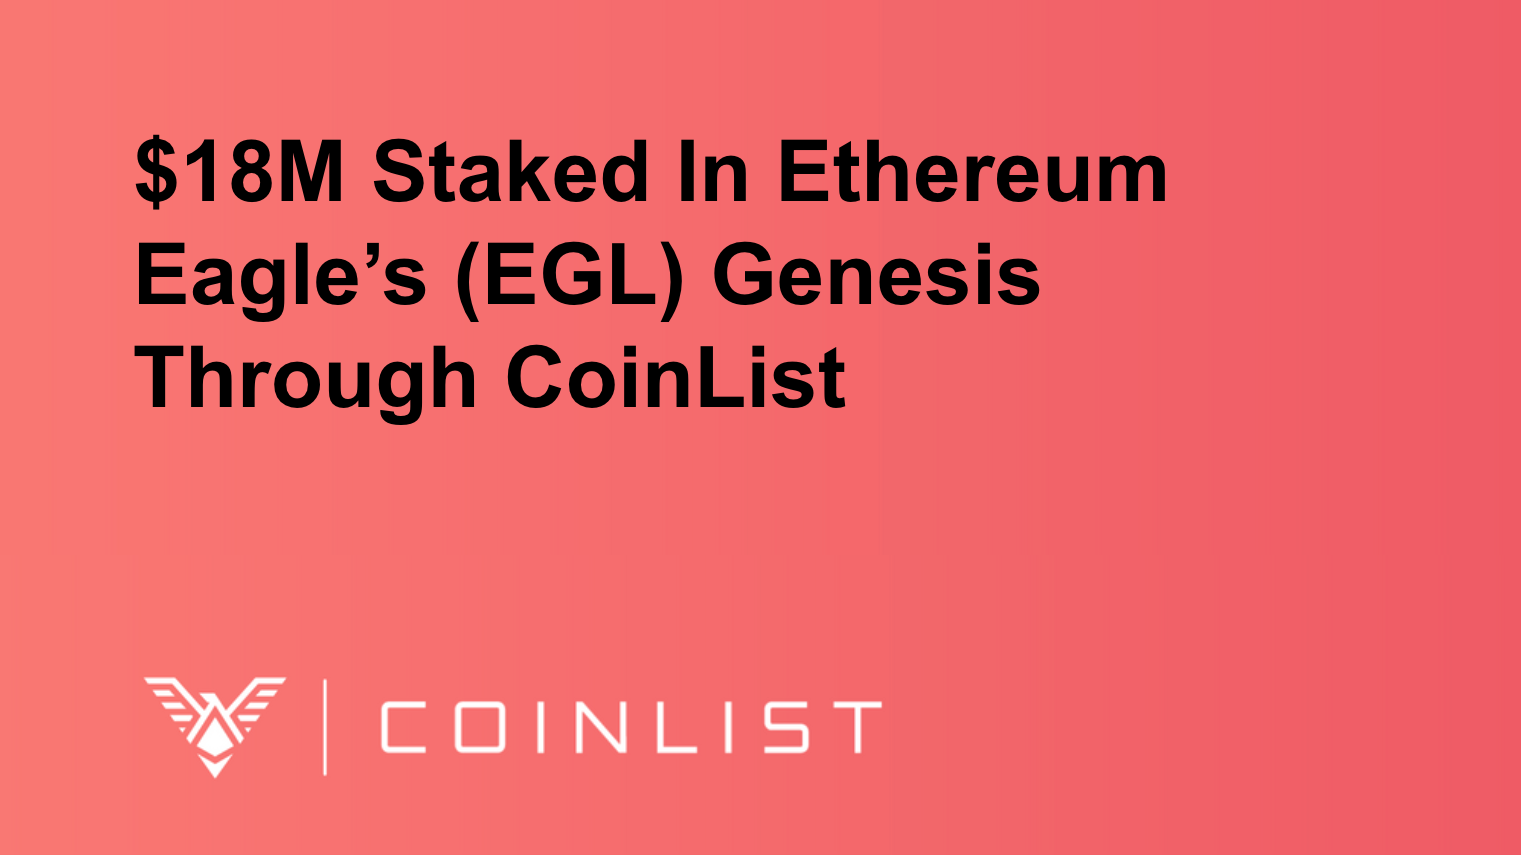 $18M Staked In Ethereum Eagle’s (EGL) Genesis Through CoinList